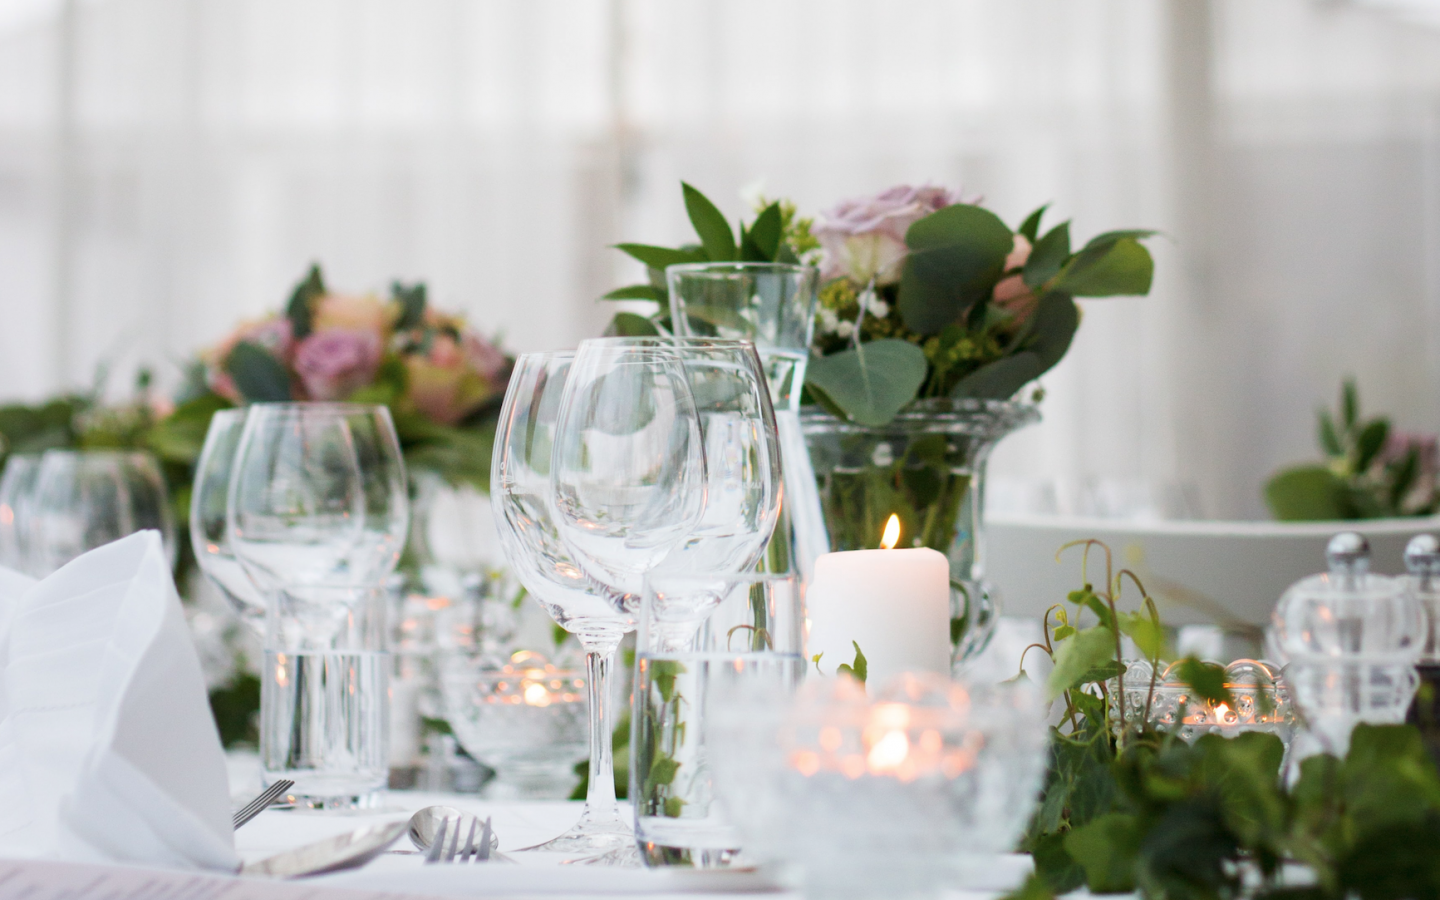 an event table set with flowers, candles, and wine glasses